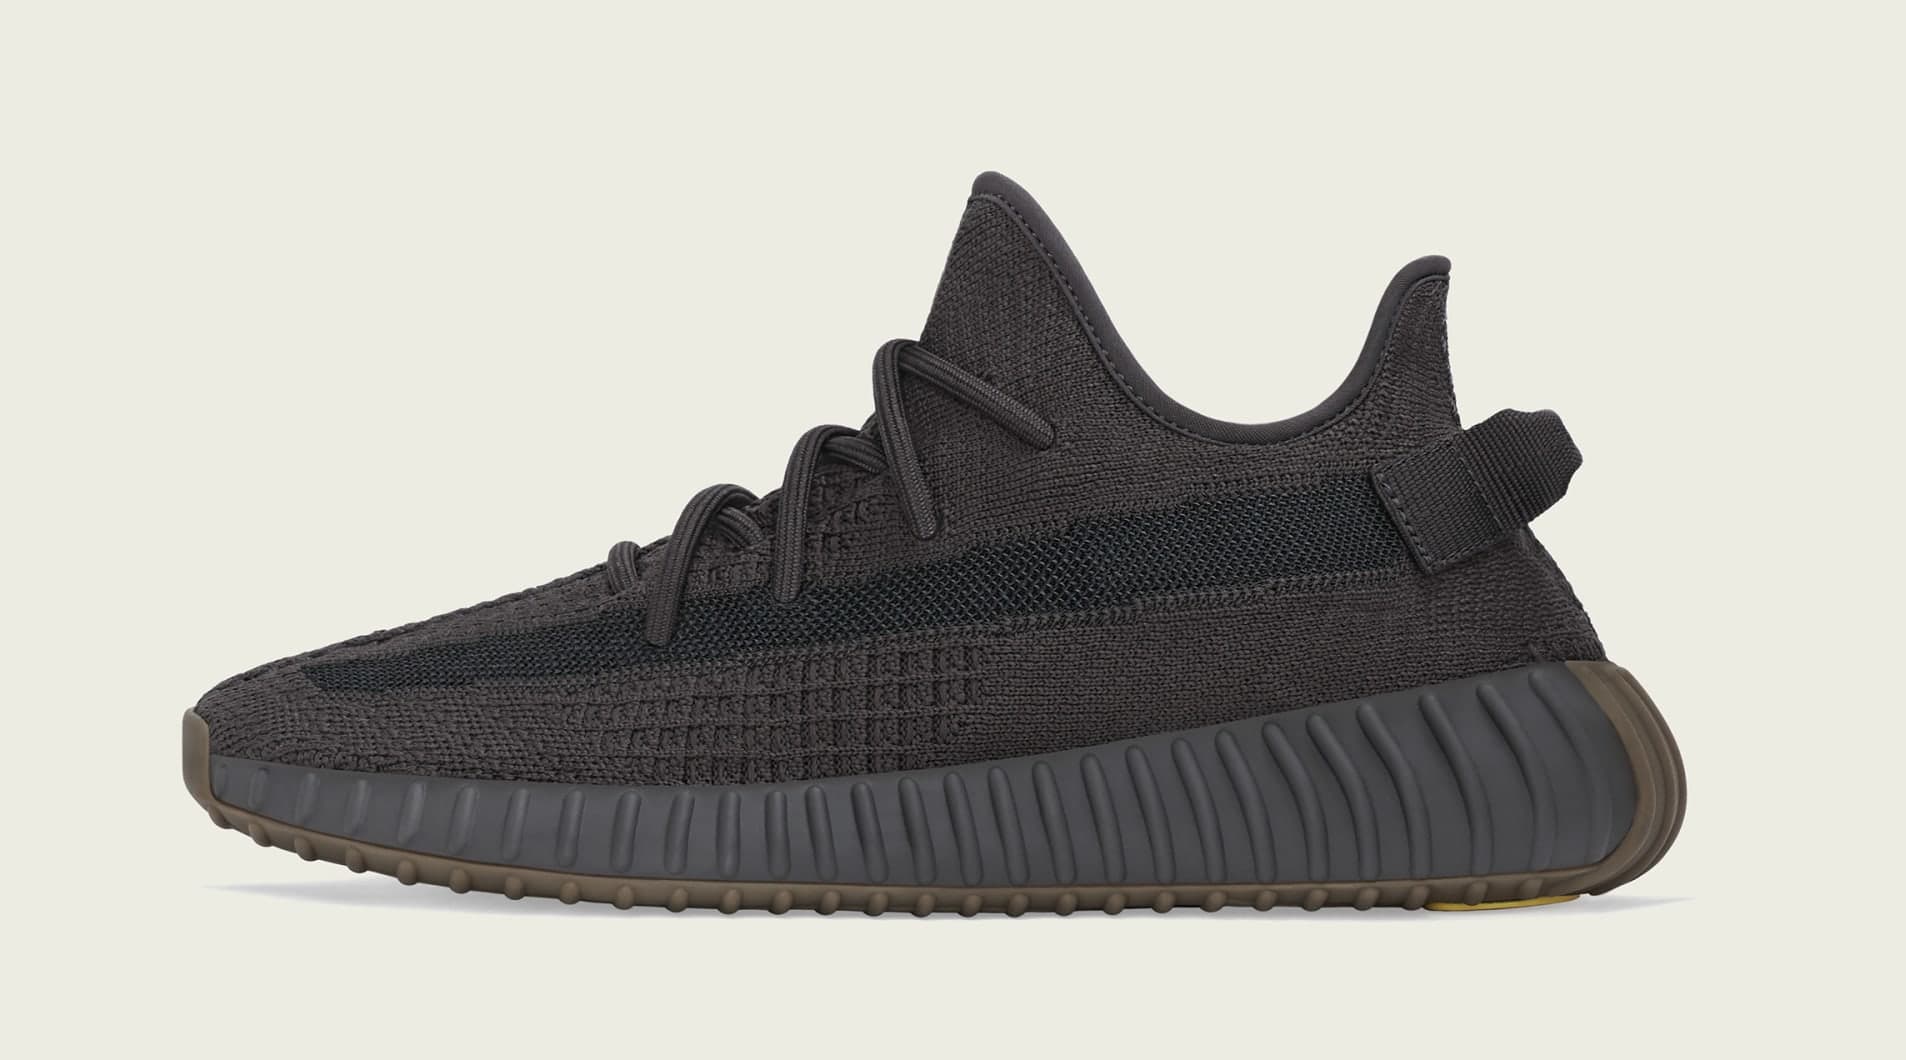 Adidas Yeezy Boost 350 V2 'Cinder' FY2903 Lateral